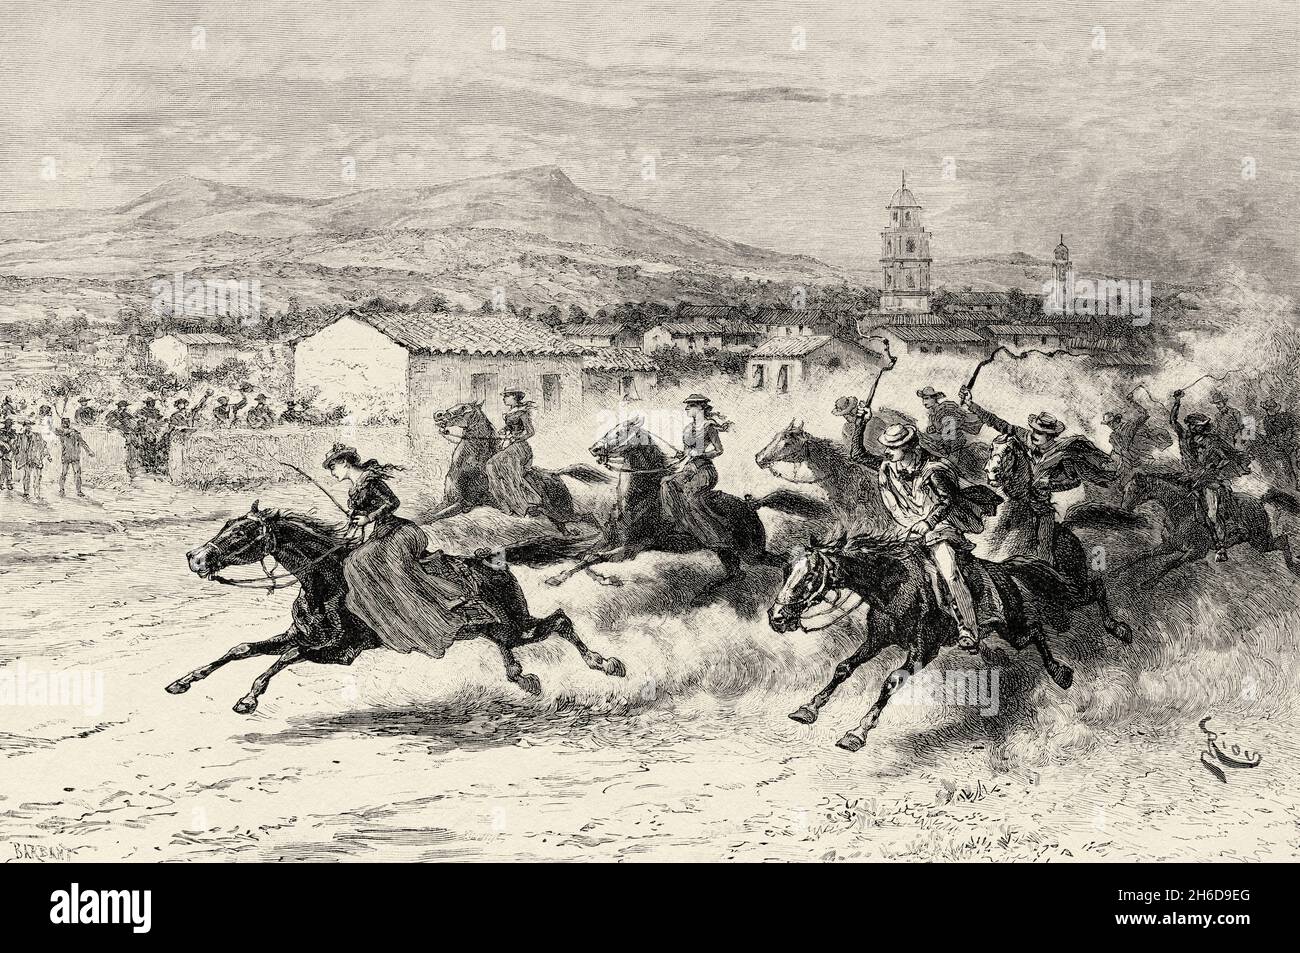 Women in a horse race in Tarija. Great Chaco, Bolivia, South America. Old 19th century engraved illustration, Expedition to the Pilcomayo Delta by French explorer Emile Arthur Thouar from Le Tour du Monde 1889 Stock Photo